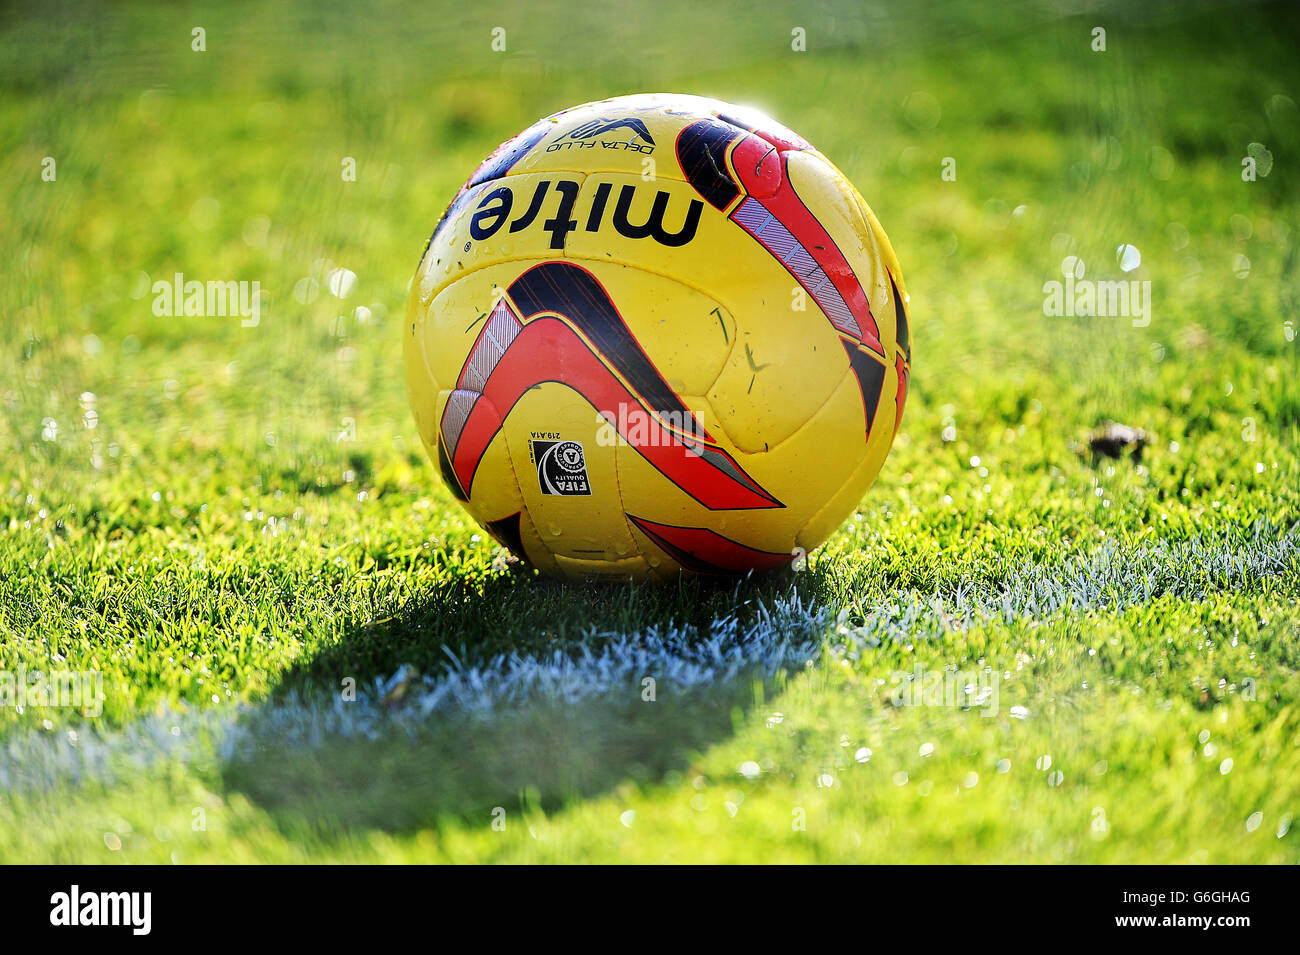 Soccer - Sky Bet League One - Coventry City v Notts County - Sixfields. Detail of the hi-visibility official Football League match ball, the Delta V12 Fluo Stock Photo